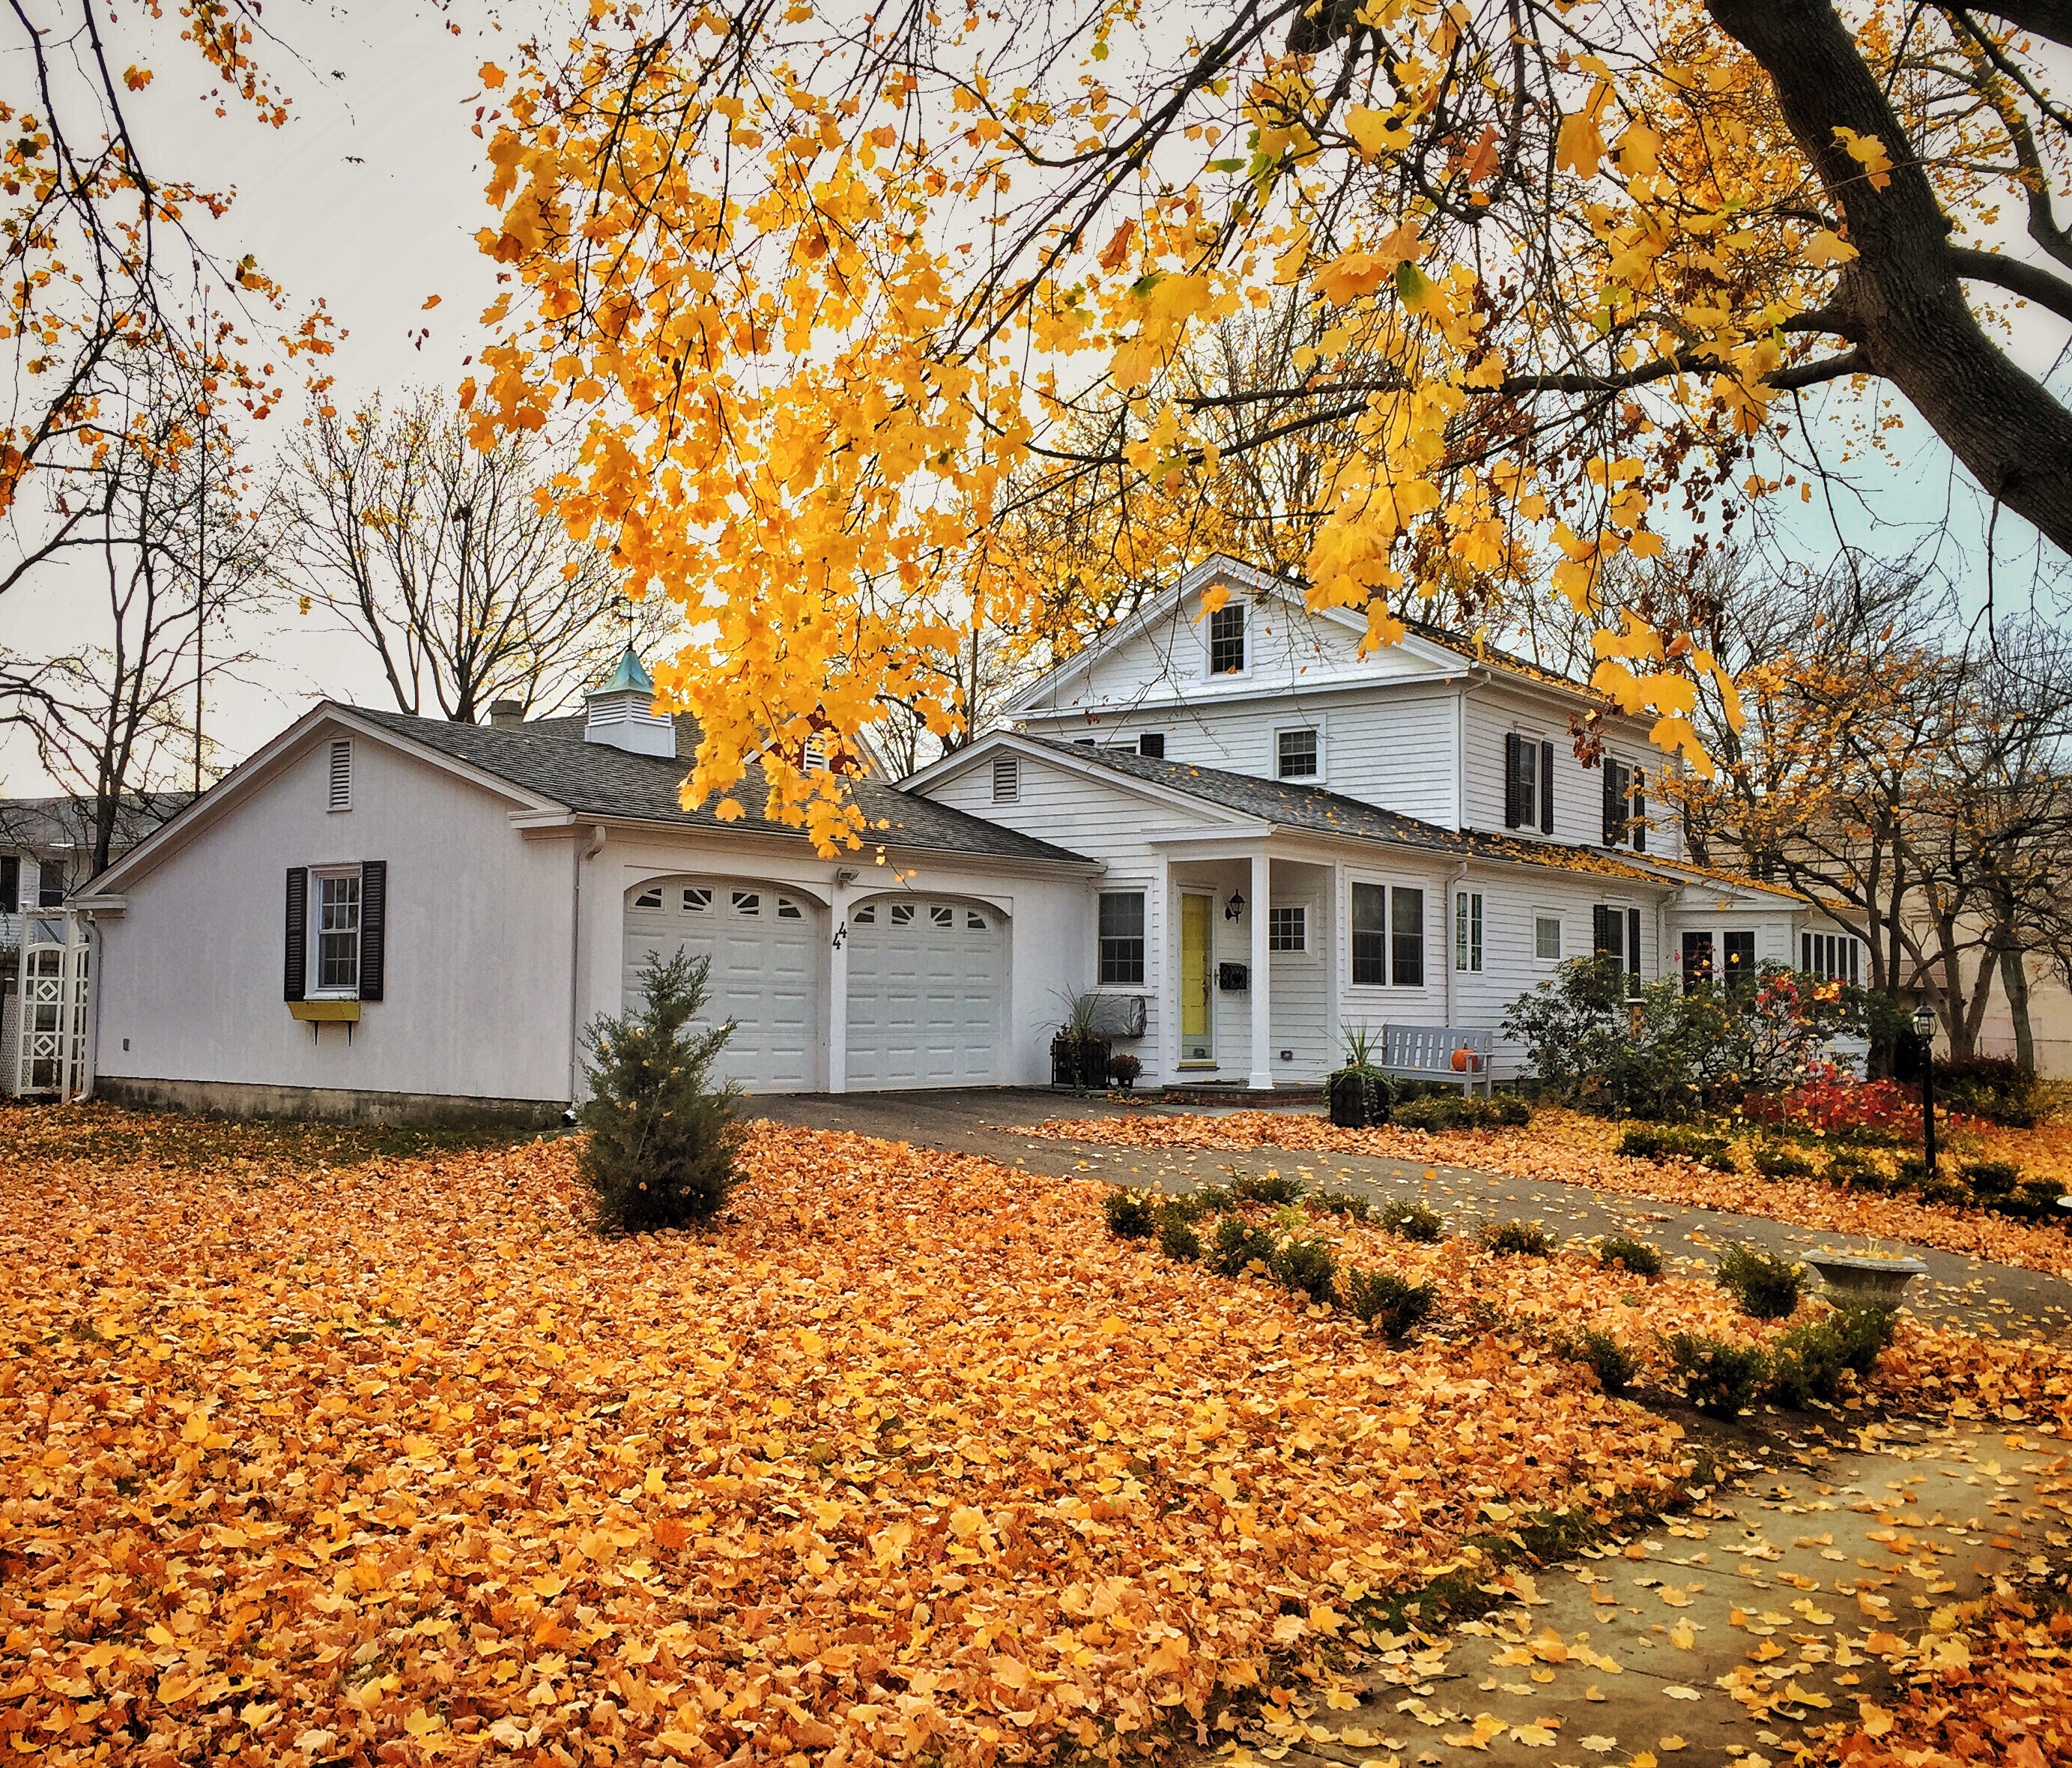 A house covered in leaves in Autumn